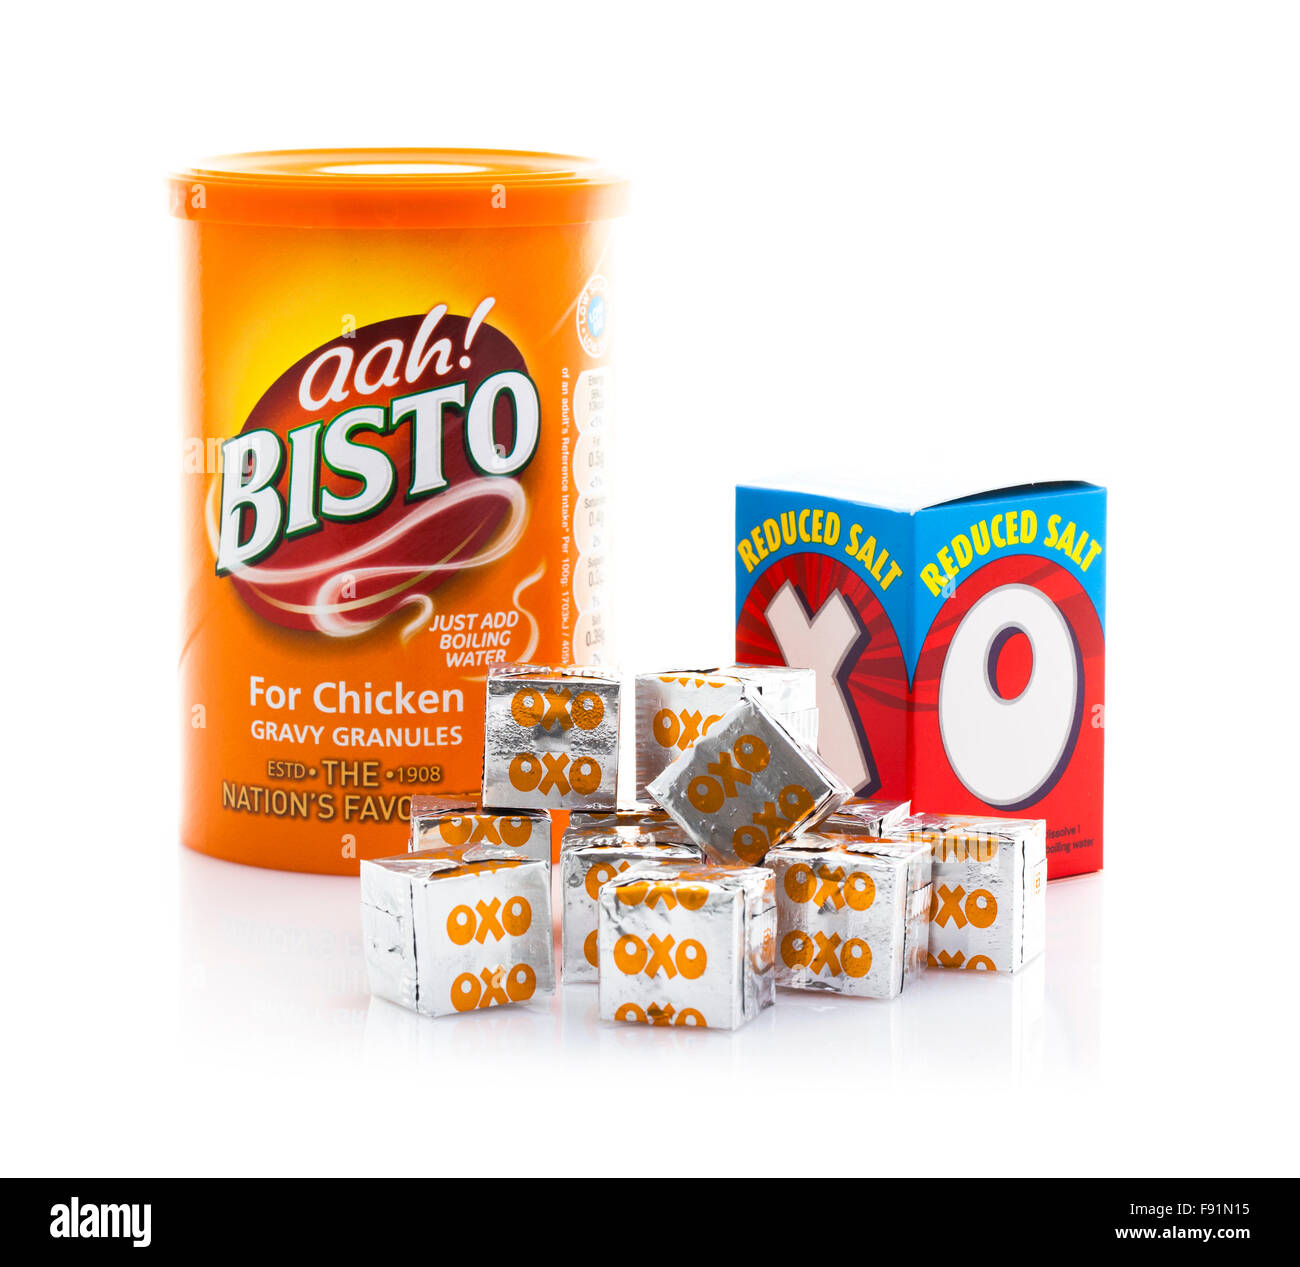 Beef And Chicken OXO stock cubes With Bisto Gravy Granules on a White Background Stock Photo